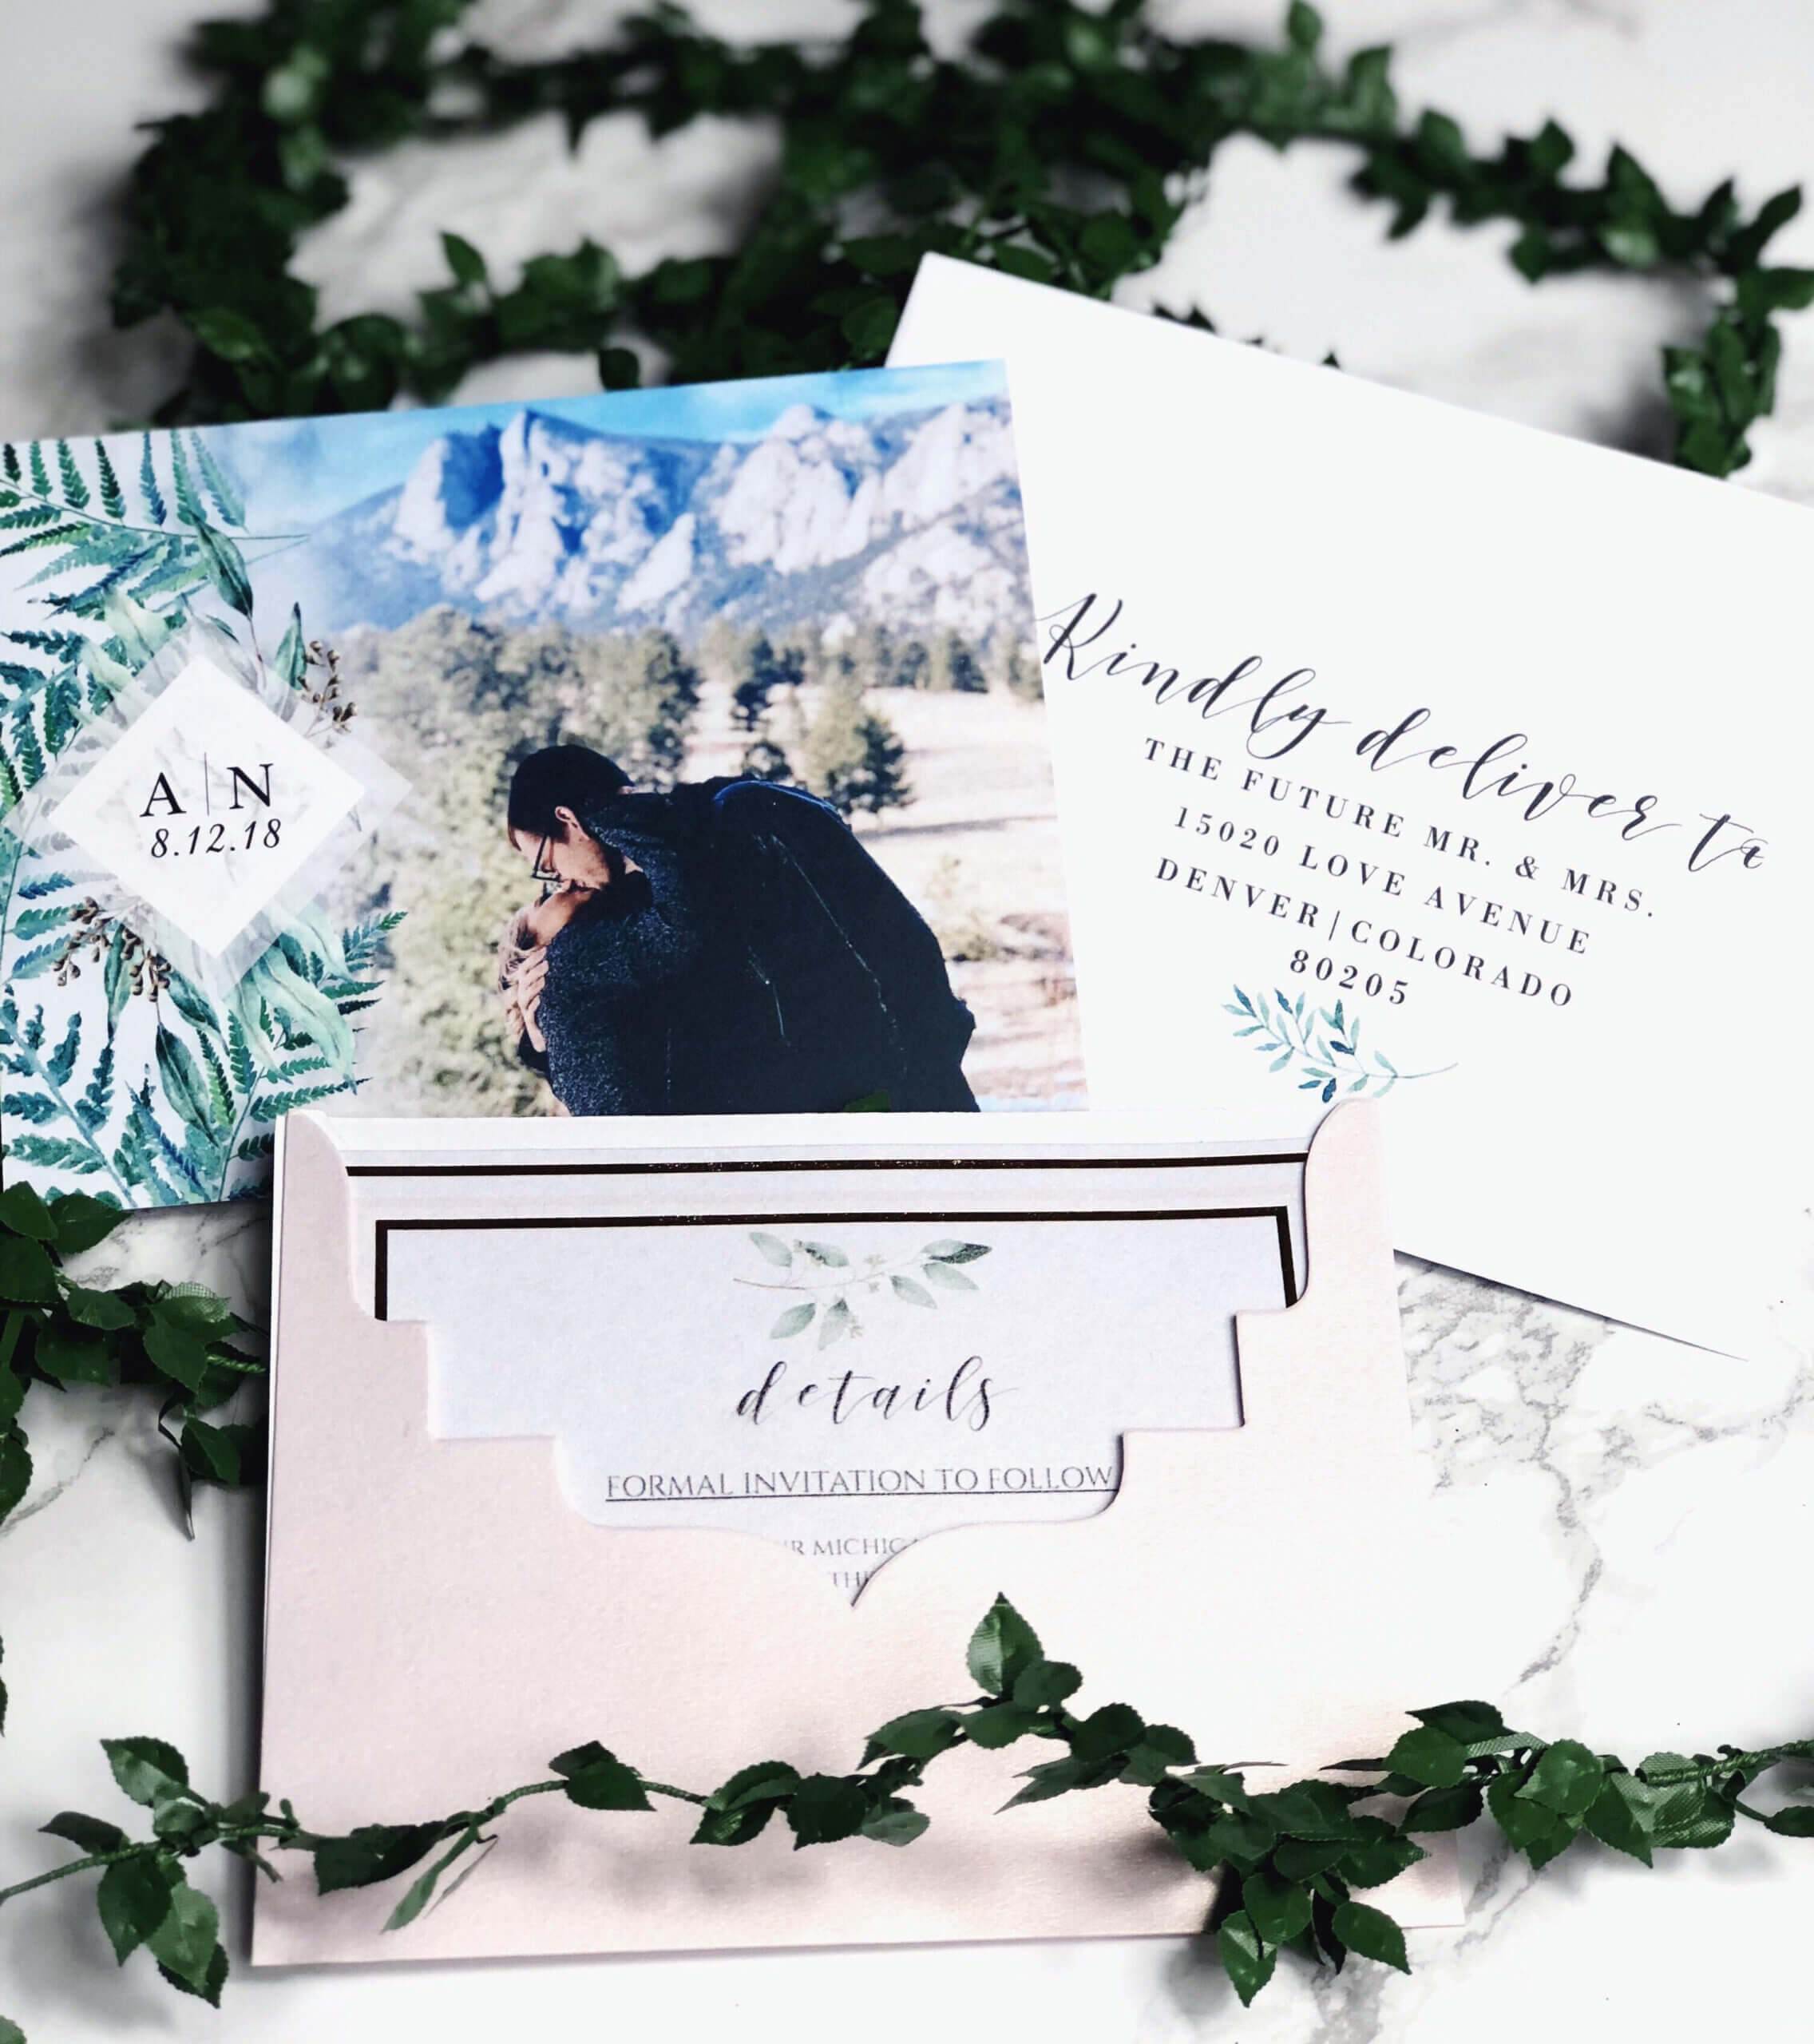 Our Save The Dates! Photo From Vistaprint, Envelope Throughout Michaels Place Card Template